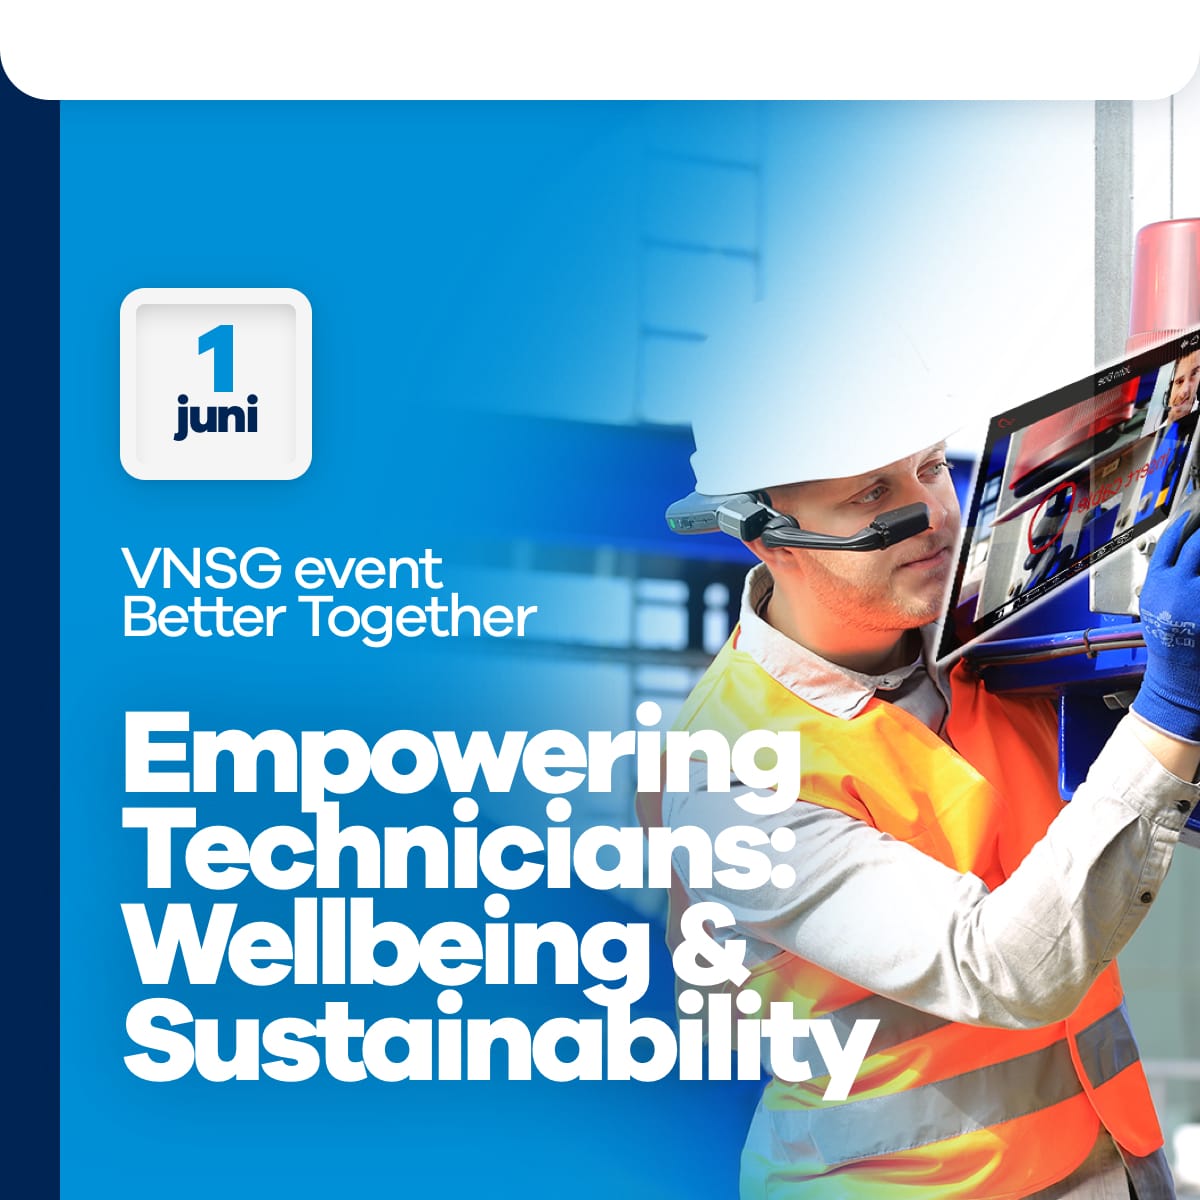 1 juni VNSG Better Together event: Empowering Technician: Wellbeing & Sustainability